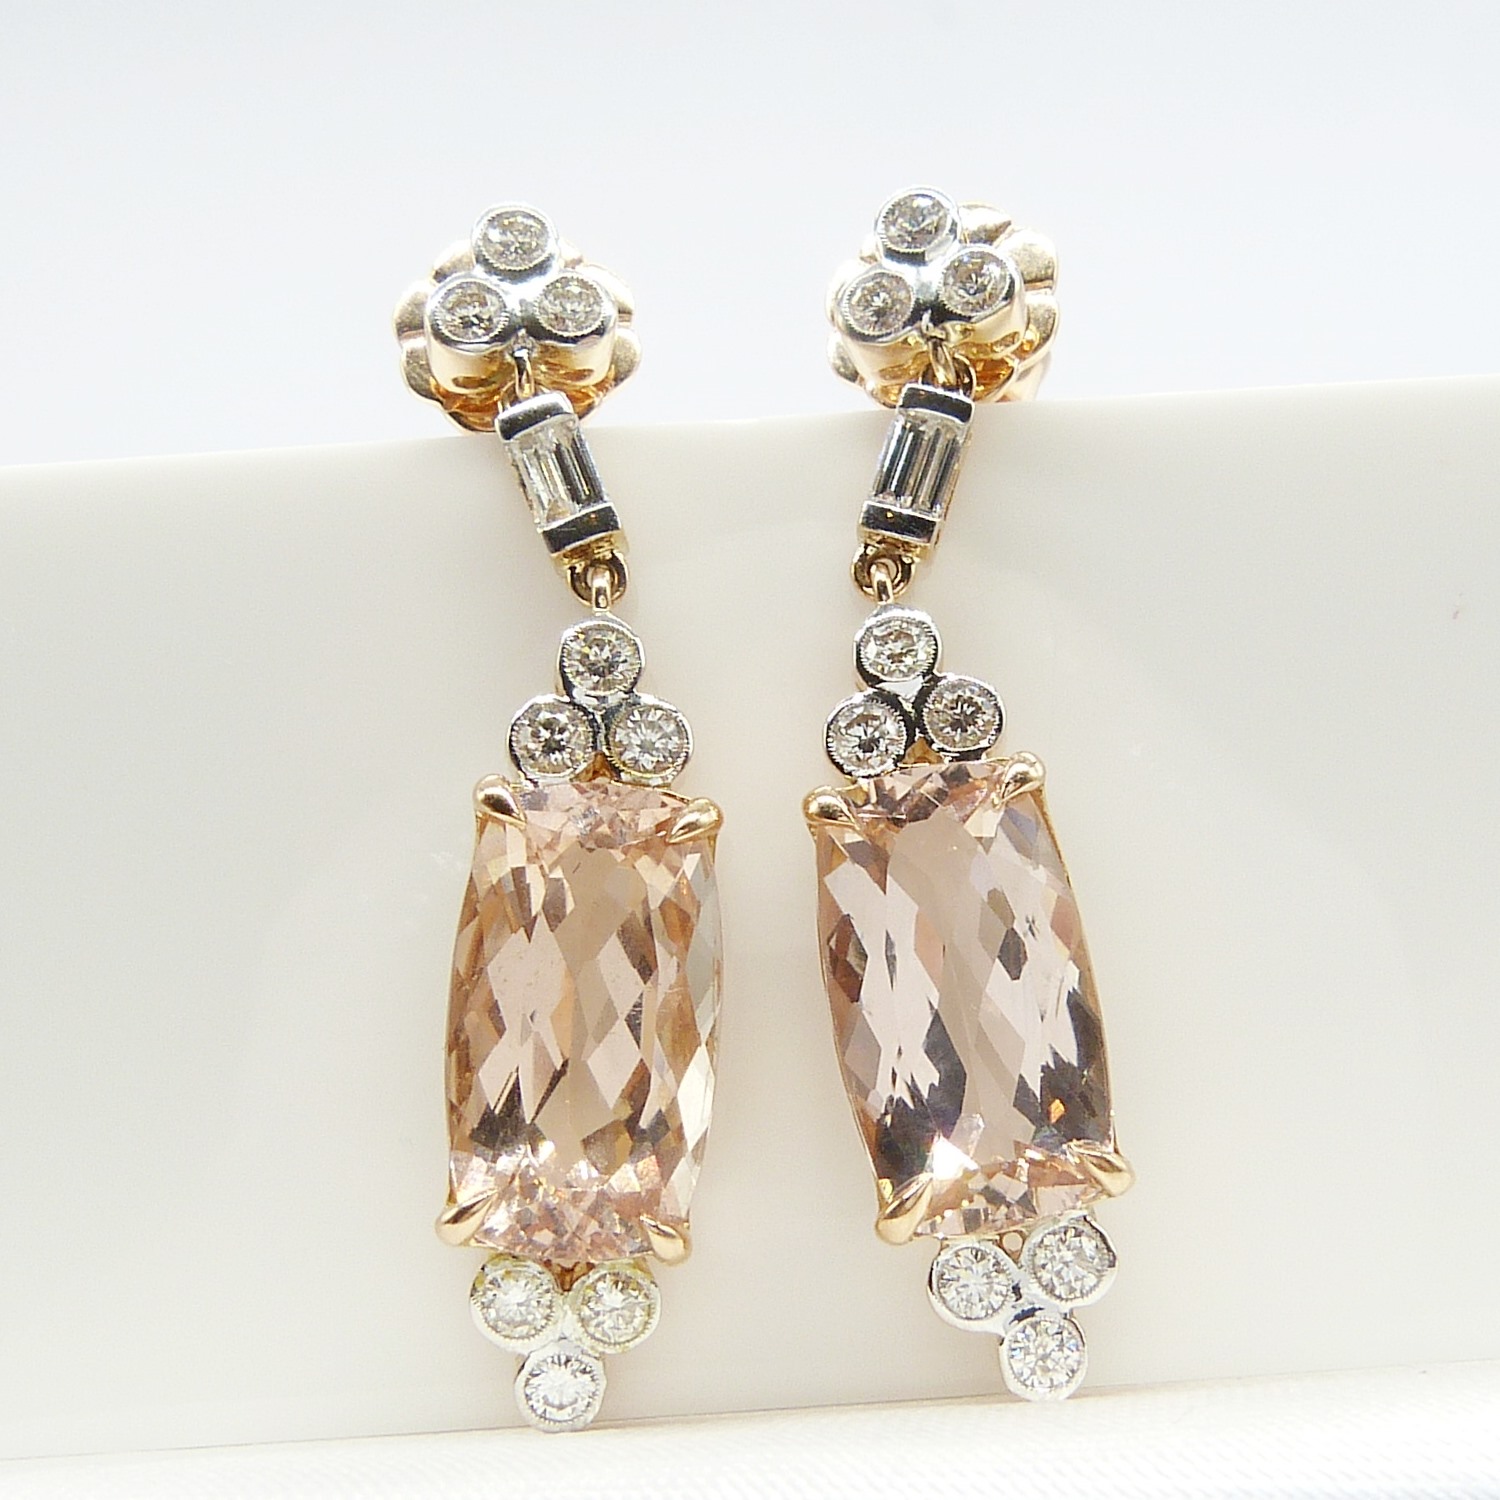 A fine quality pair of checkerboard cushion-cut morganite and diamond drop earrings in rose gold